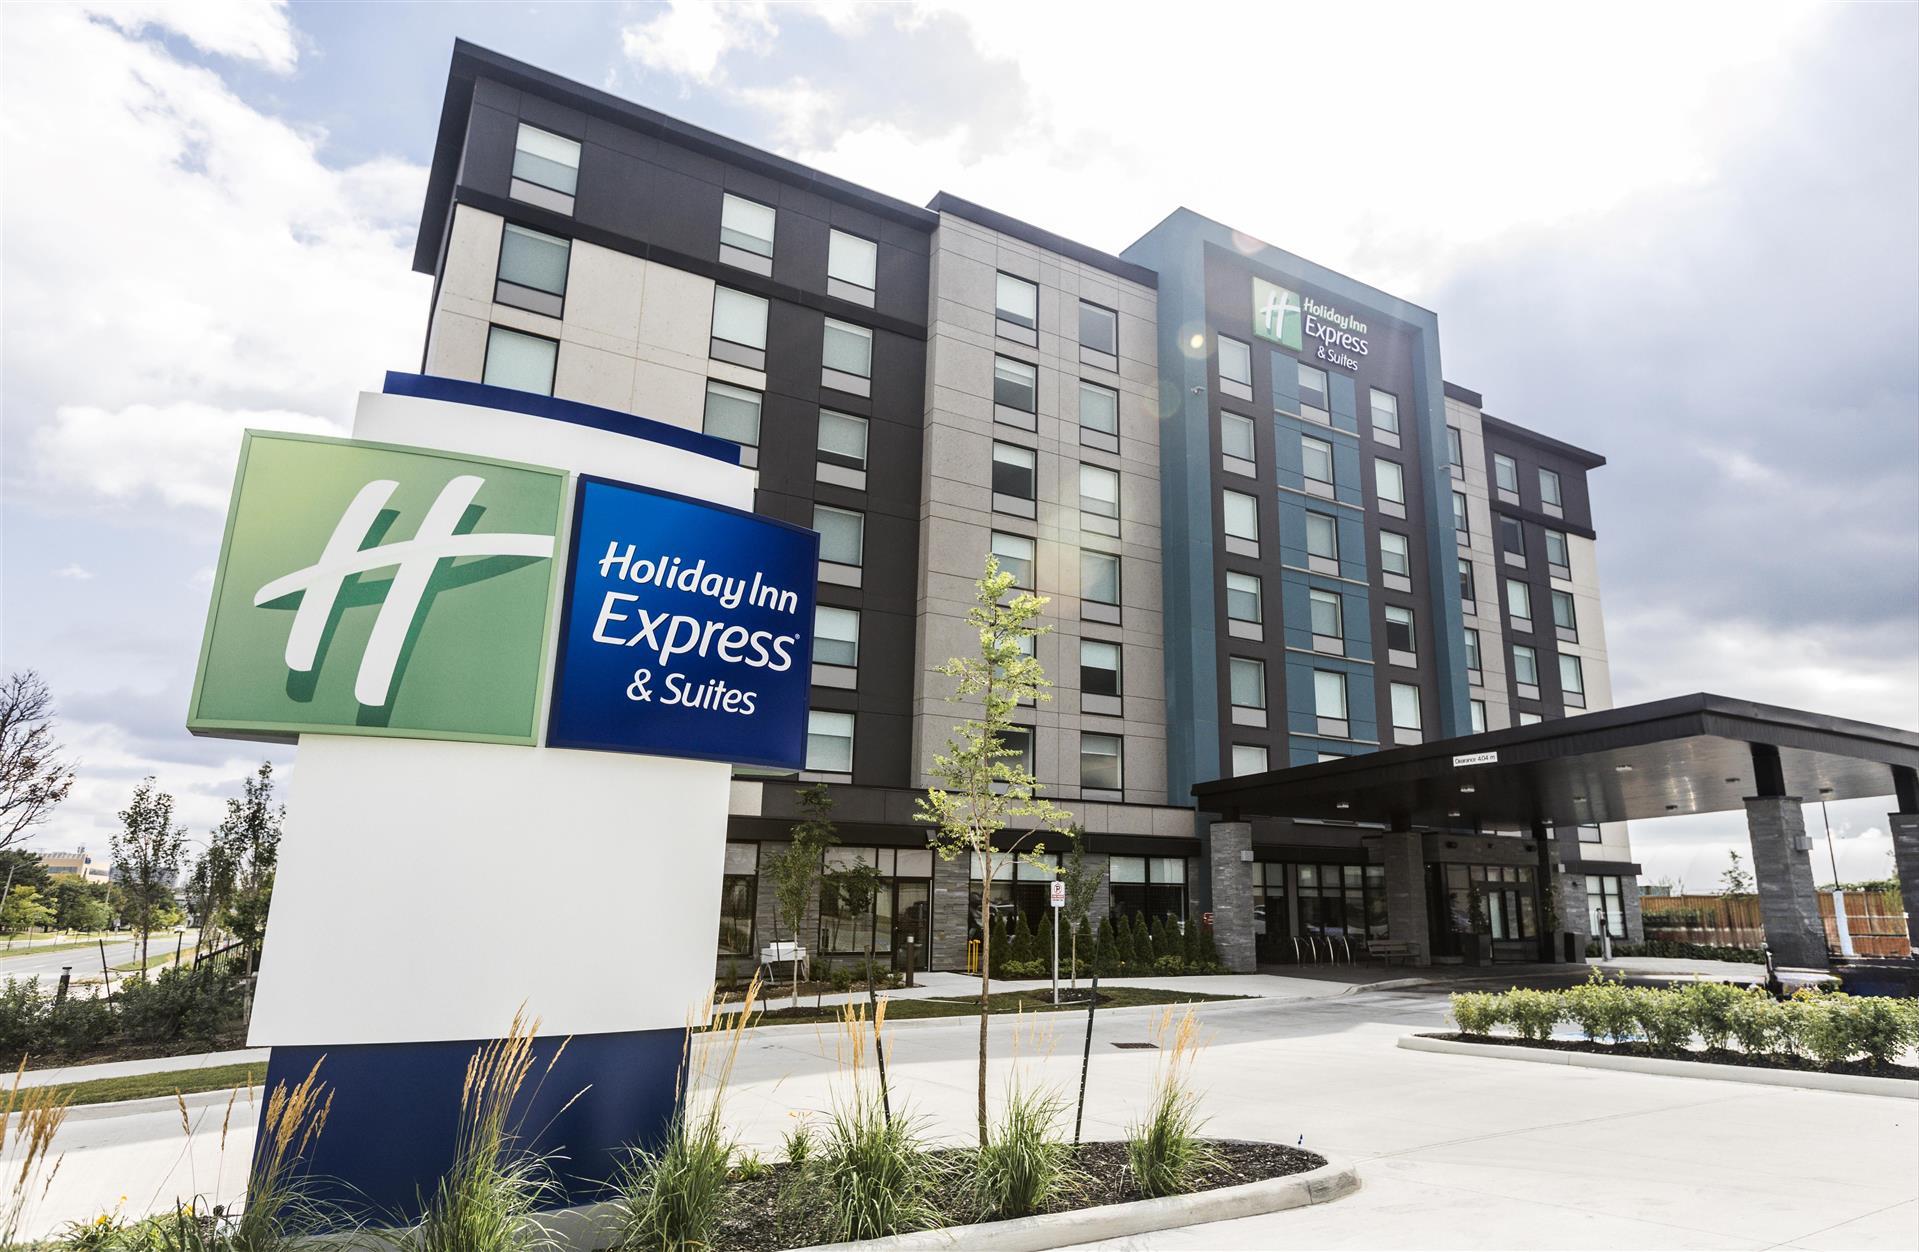 Holiday Inn Express & Suites Toronto Airport South in Toronto, ON